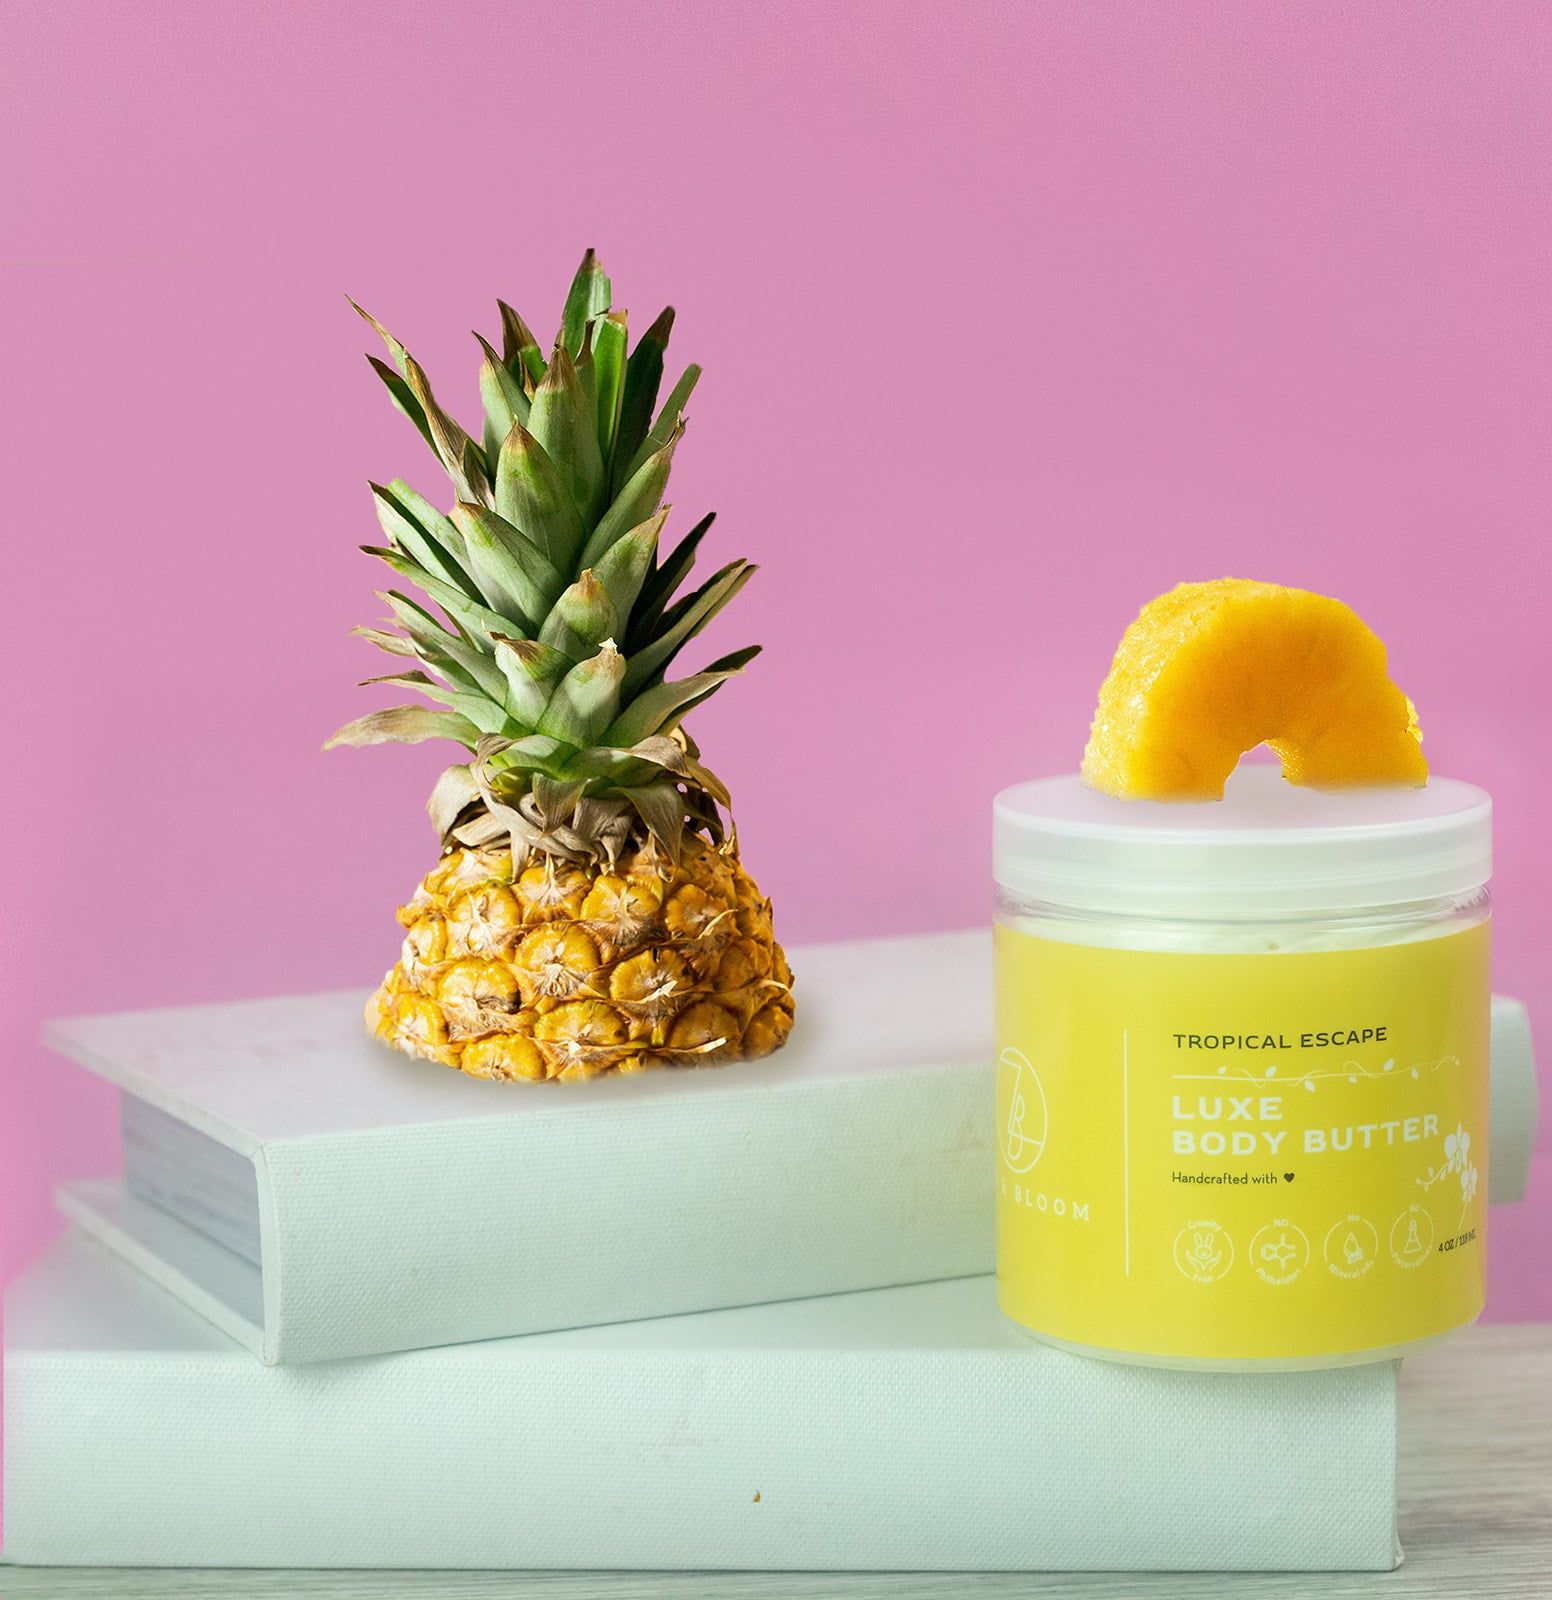 Zen & Bloom Tropical Escape Whipped Body Butter | 4 oz jar for $18